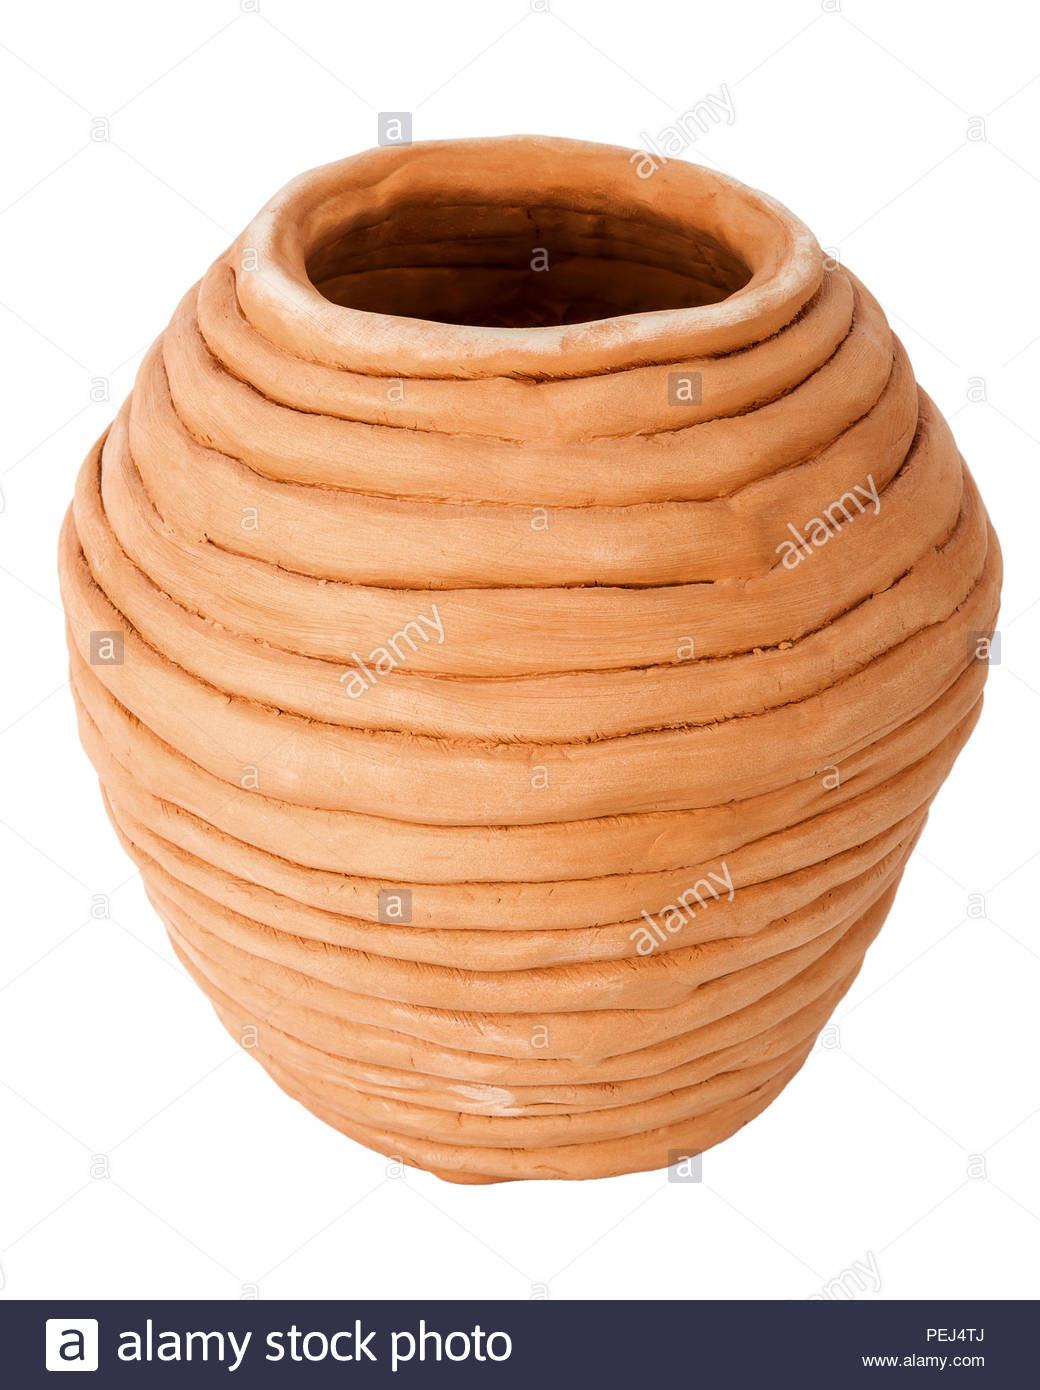 Van Briggle Vase Shapes Of Clay Decorative Vase Stock Photos Clay Decorative Vase Stock Intended for Unglazed Handmade Coiled Pottery Pot Made Of Red Clay isolated On White Background Terracota Vase